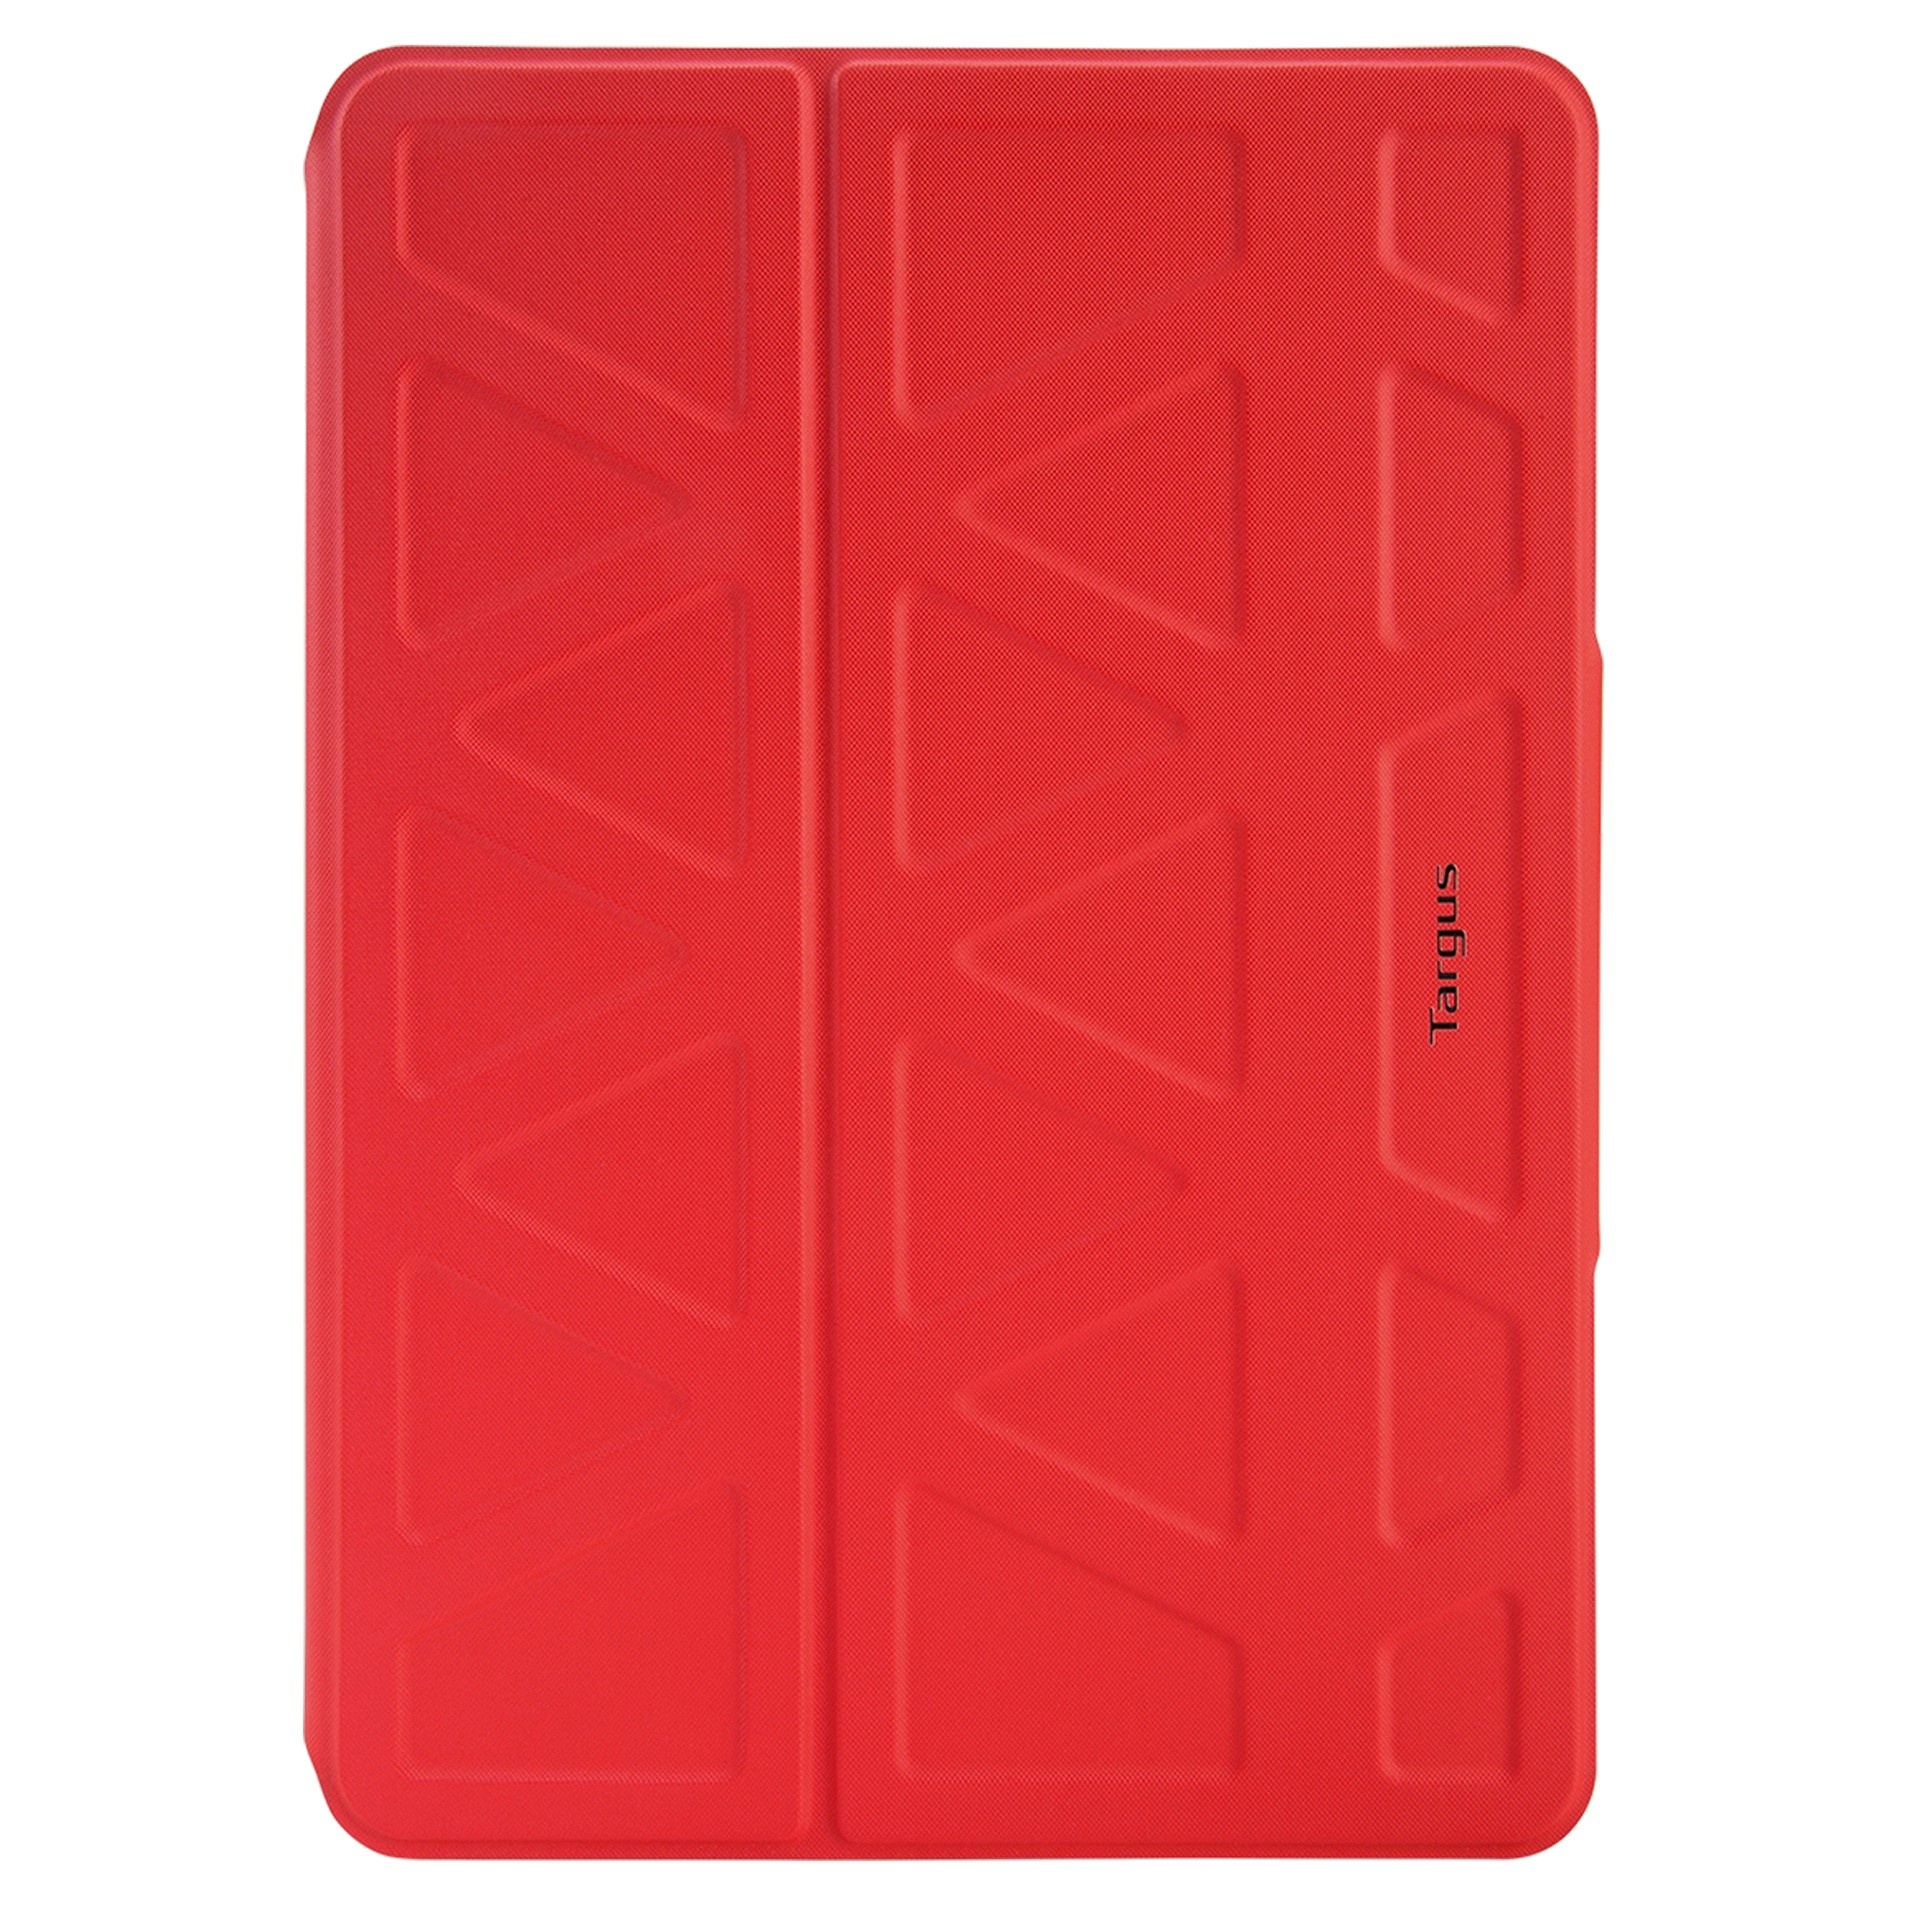 slide 1 of 1, Targus 3D Protection Case For iPad Air, iPad Air2 And iPad Pro - Red, 1 ct